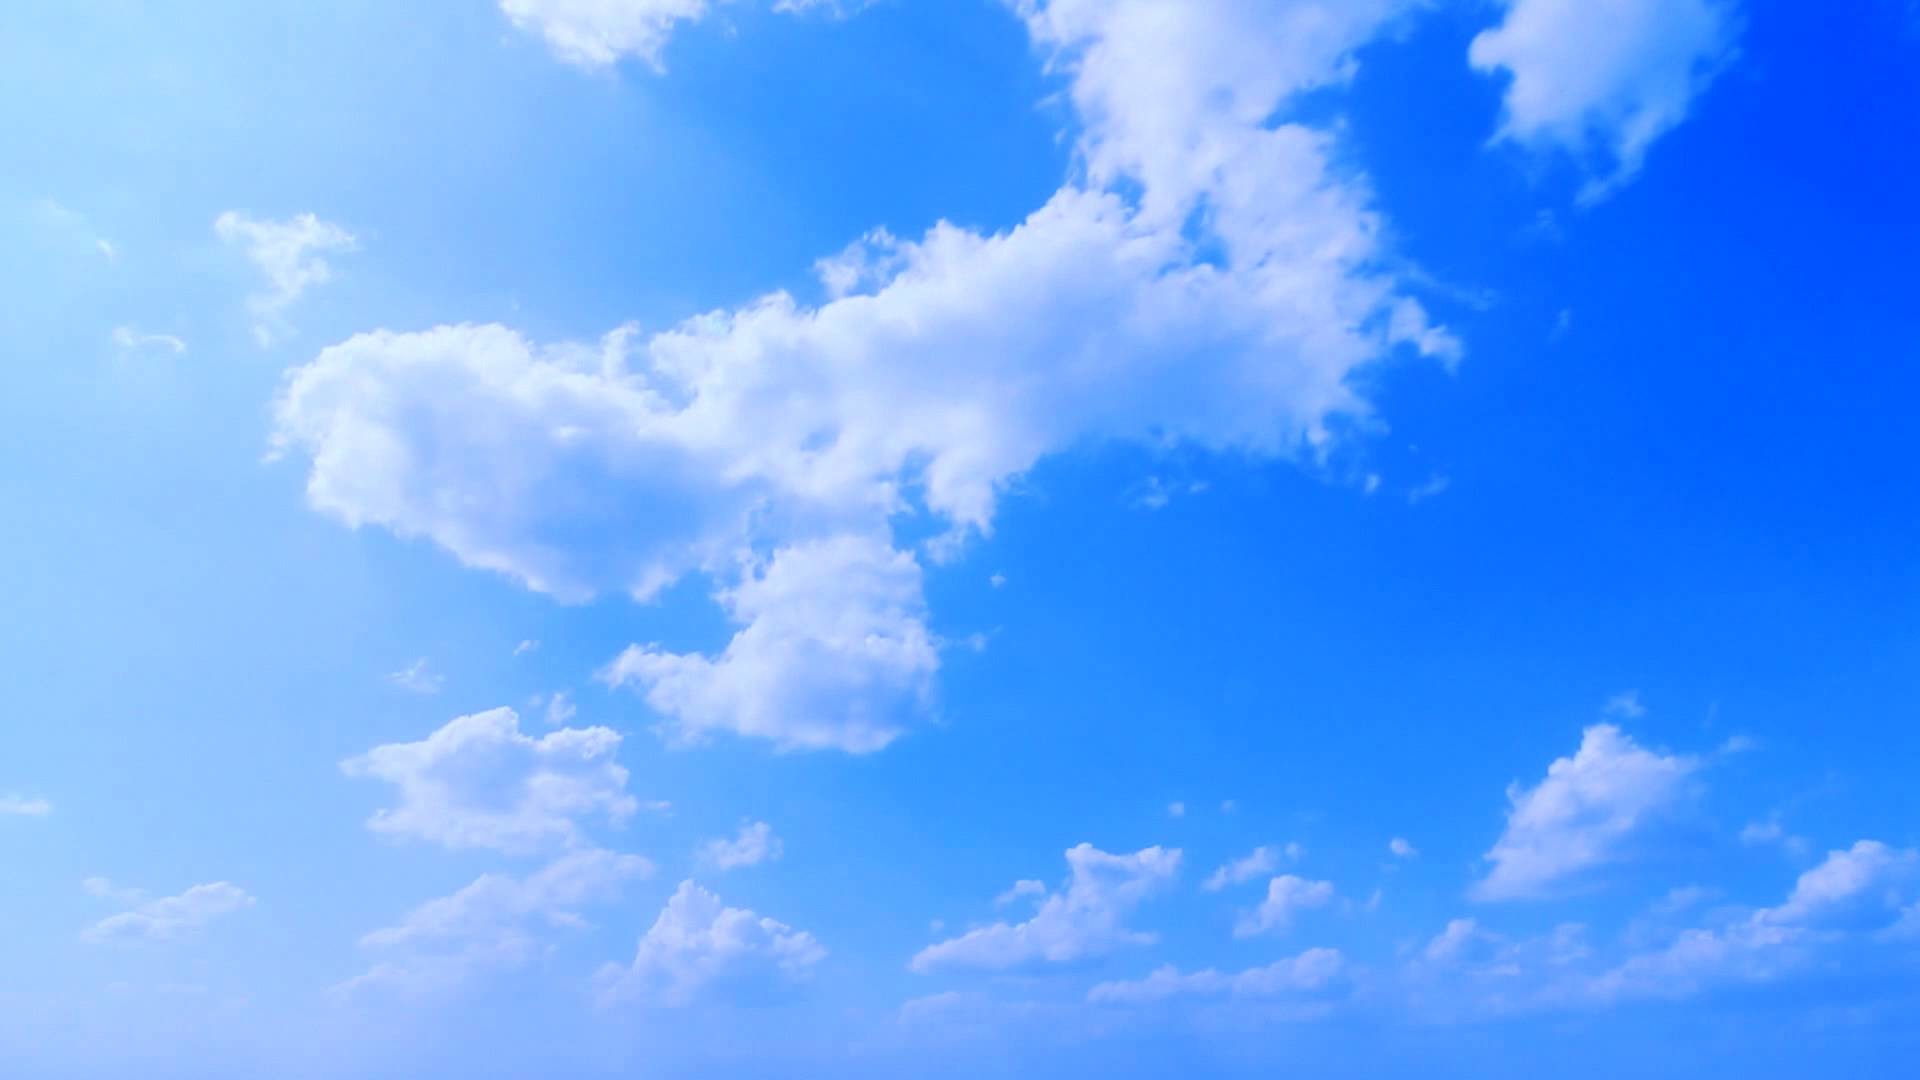 blue sky with clouds wallpaper (56+ images) on blue sky with clouds wallpapers